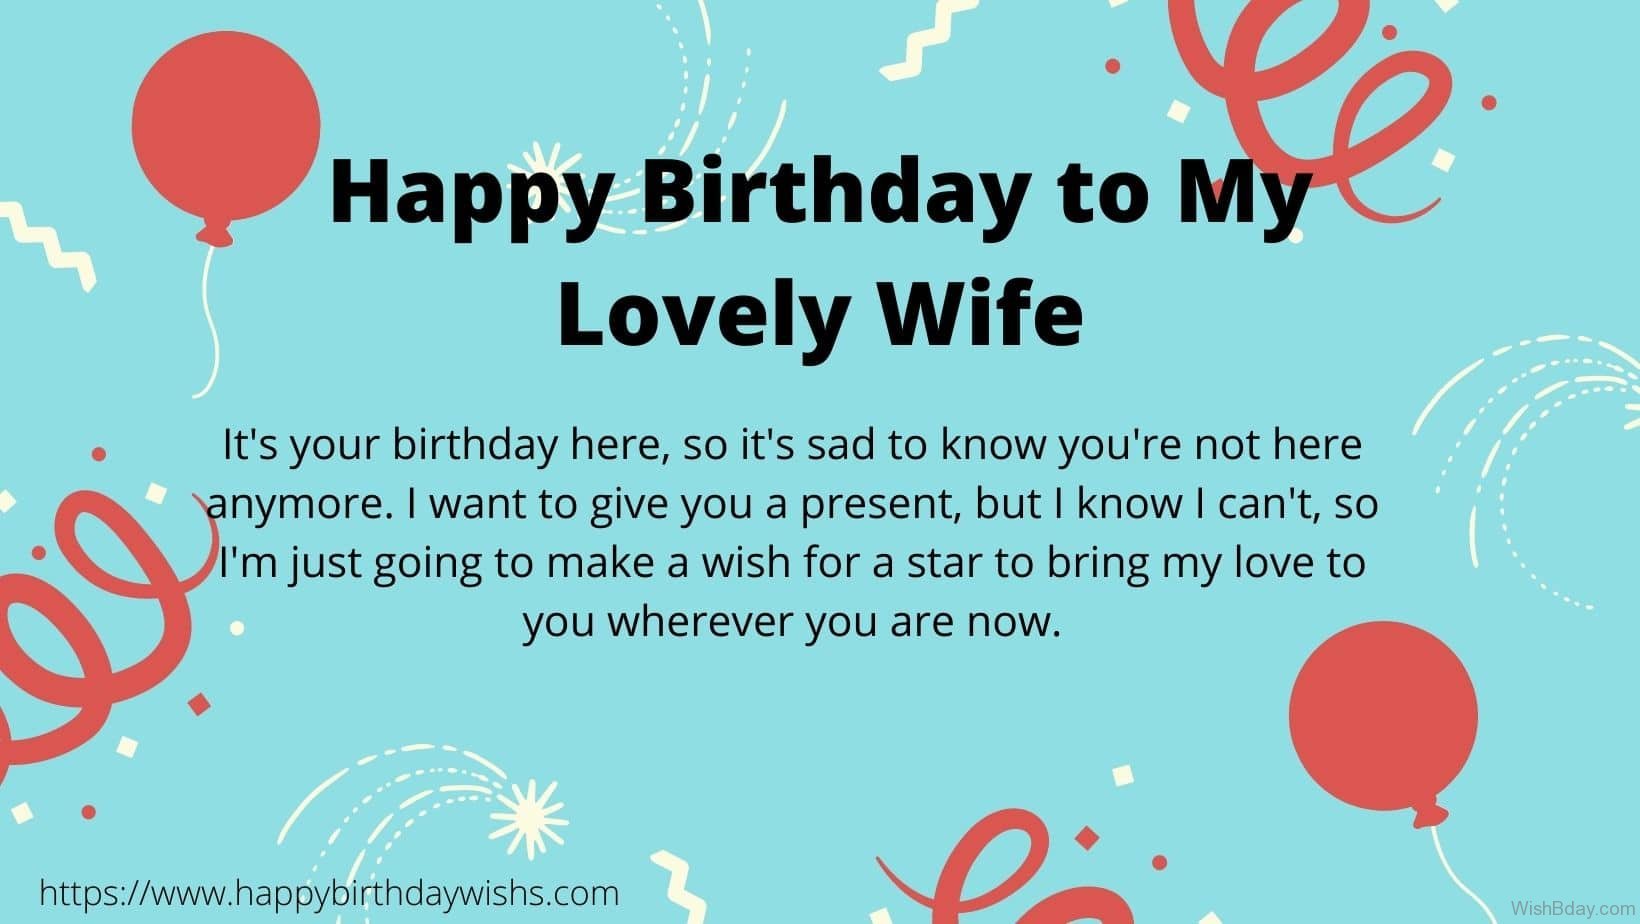 Birthday wishes for wife in heaven